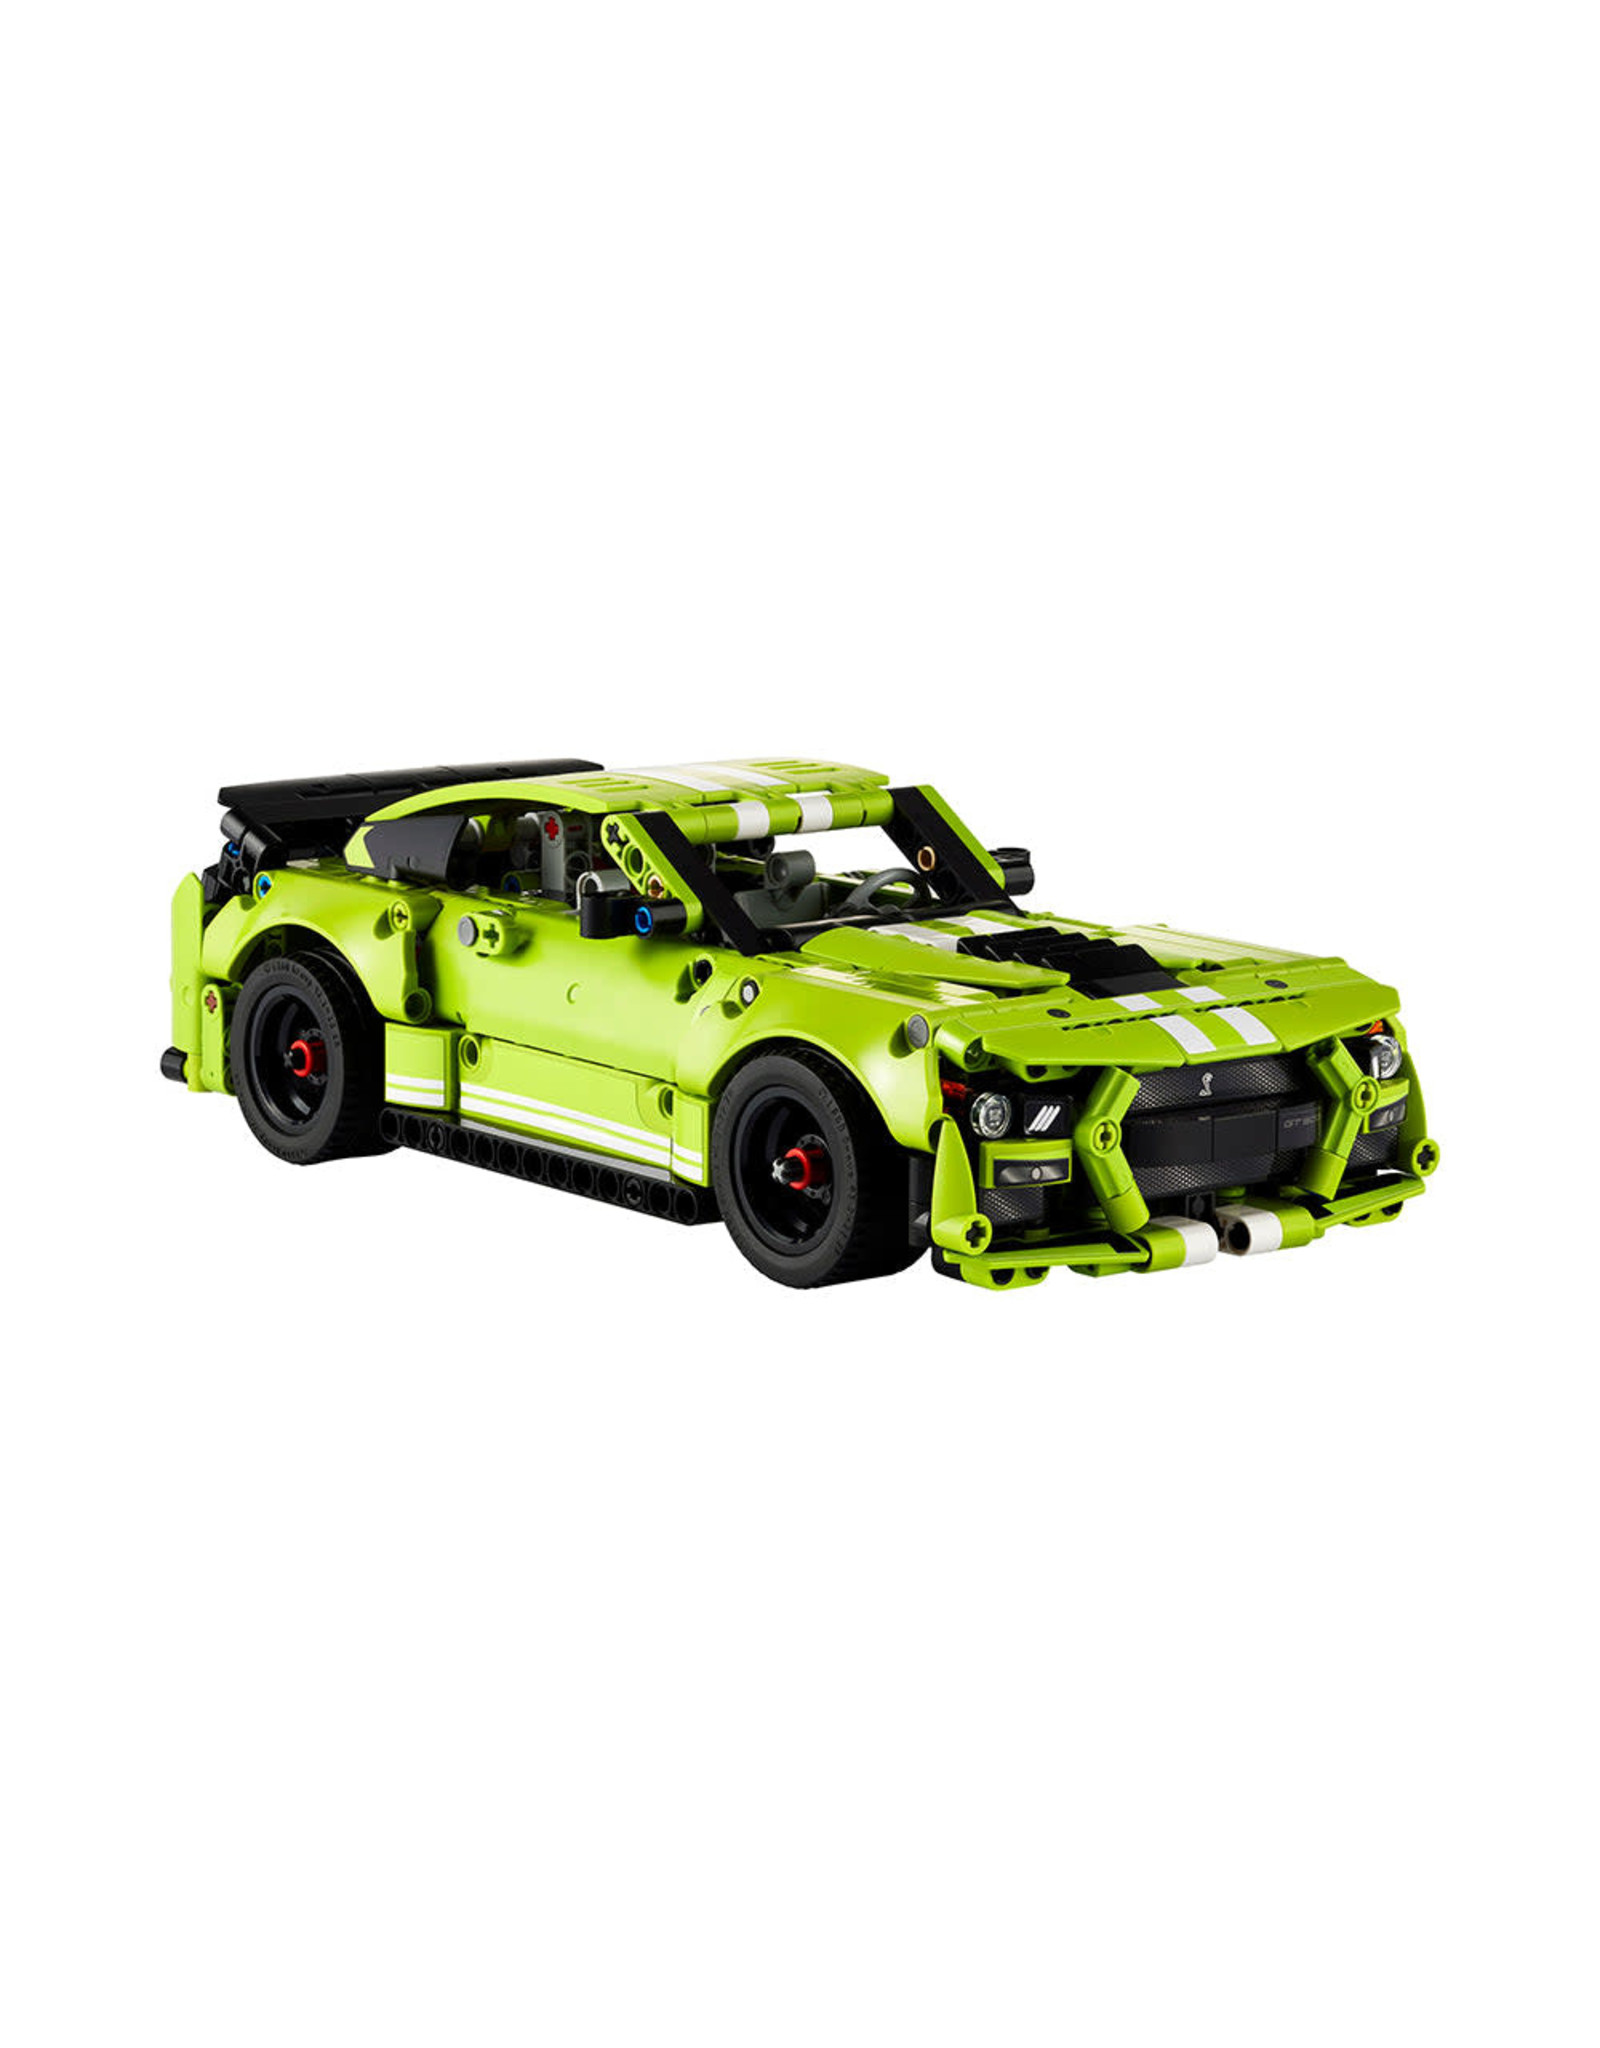 LEGO Technic Ford Mustang Shelby GT500 42138 Model Building Kit (544 Pieces)